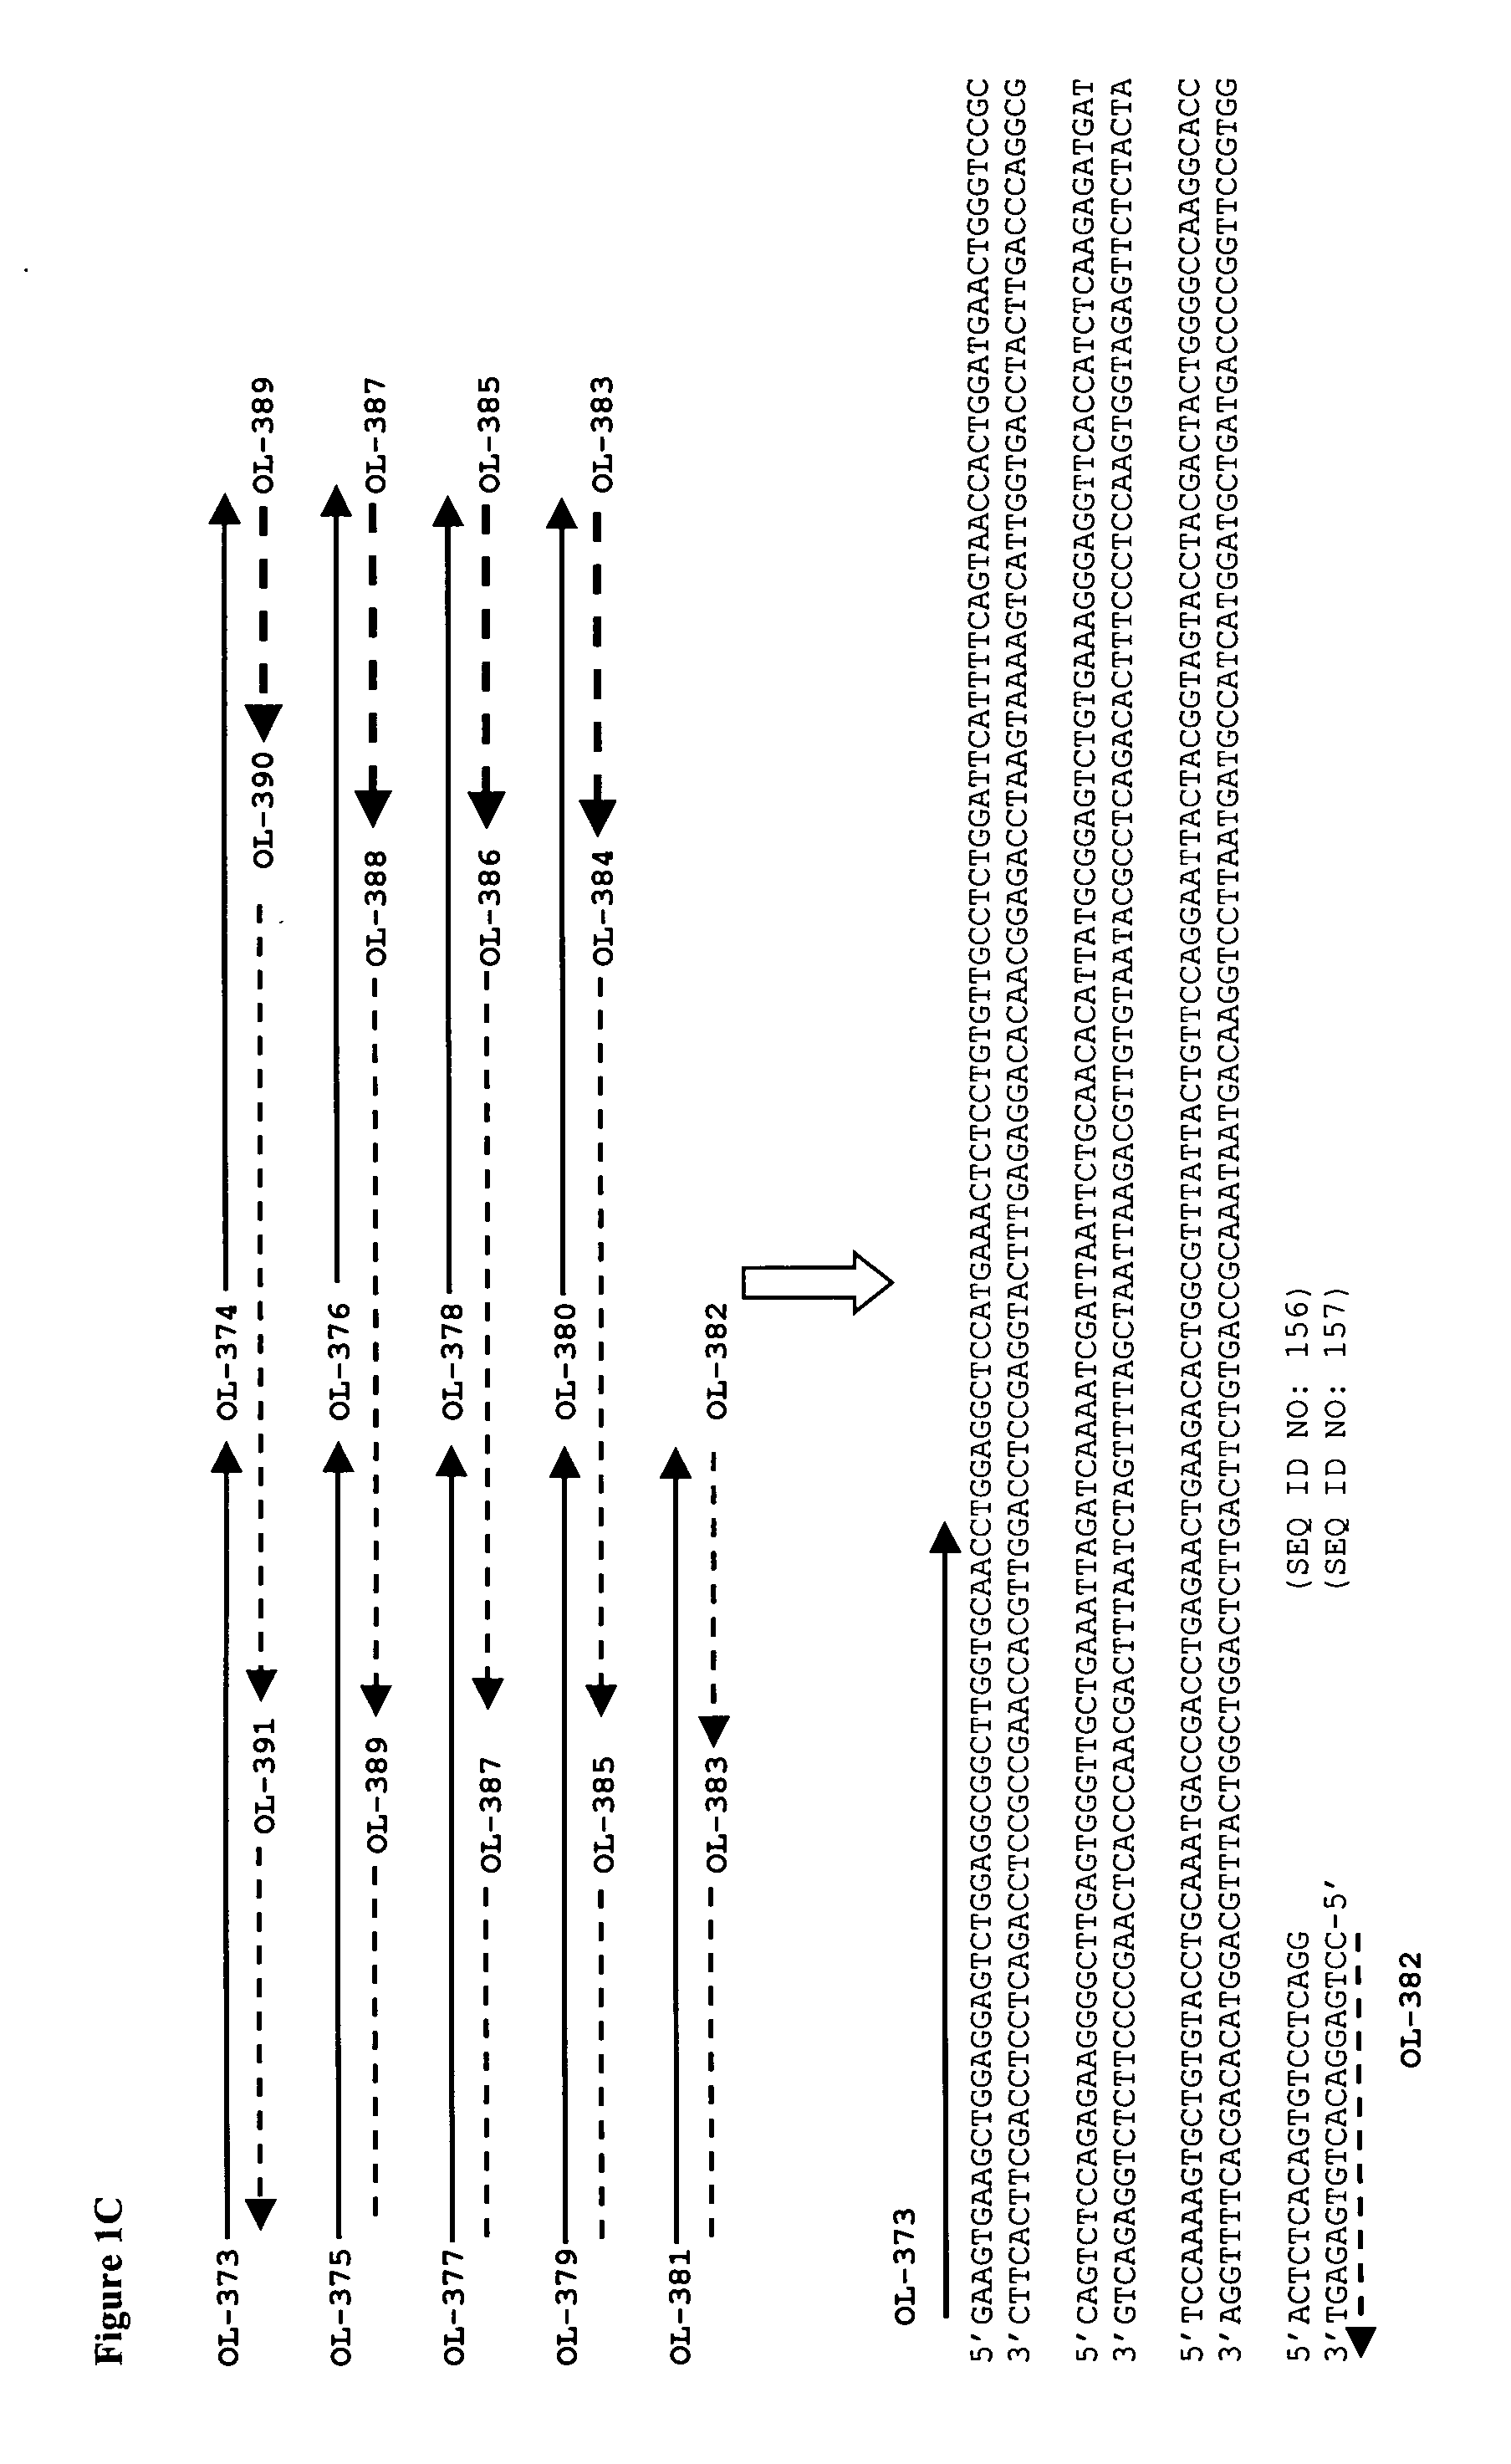 TNF alpha-binding polypeptide compositions and methods